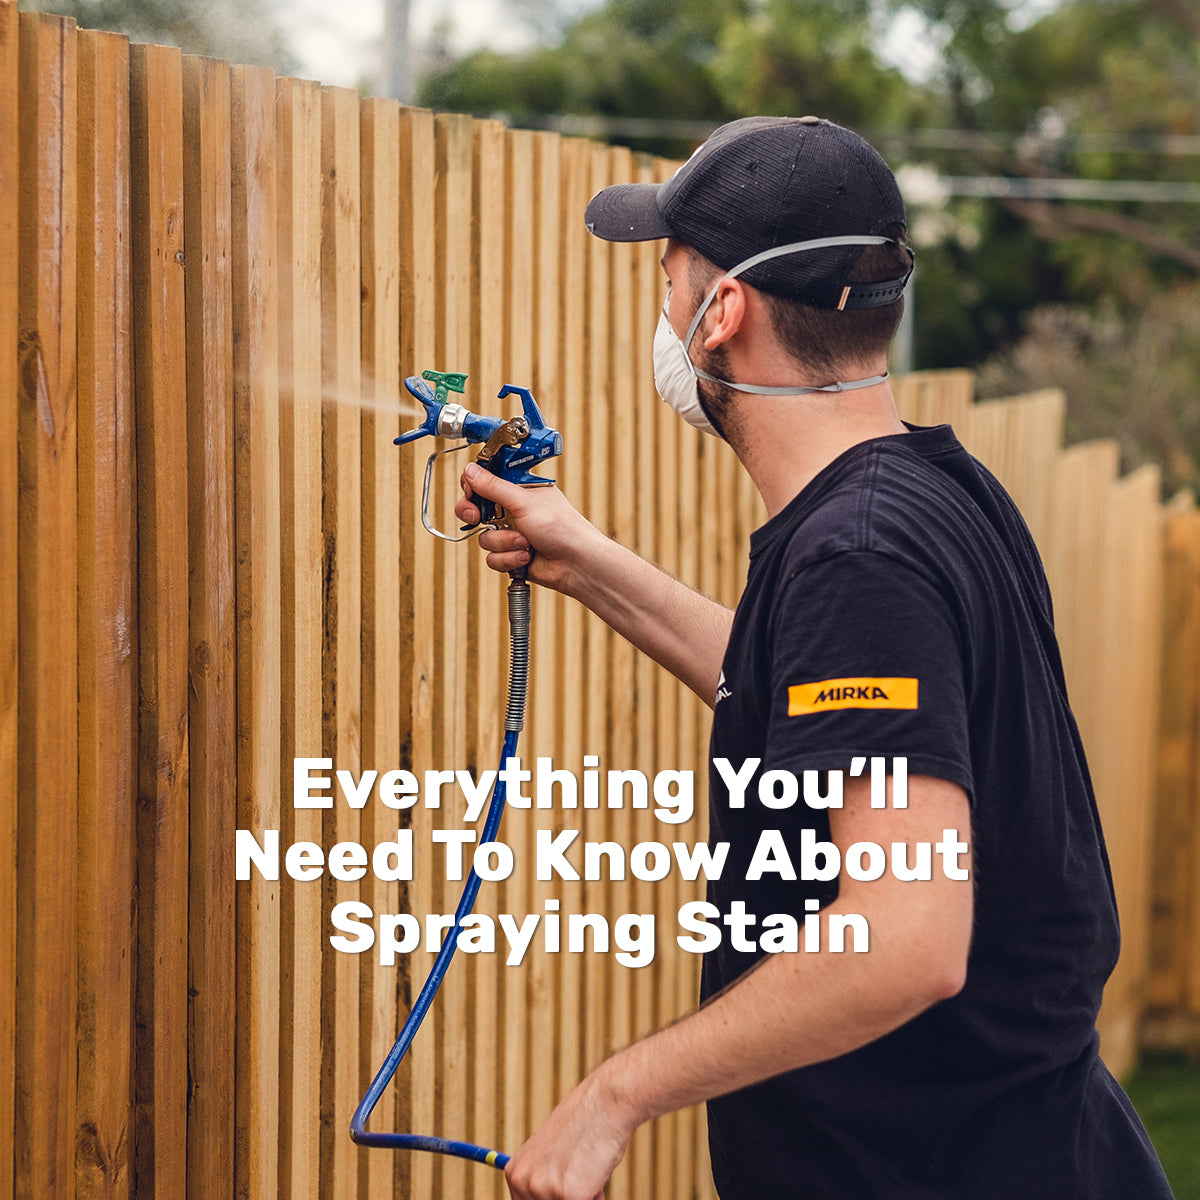 Everything You'll need to know about spraying stain onto a fence.